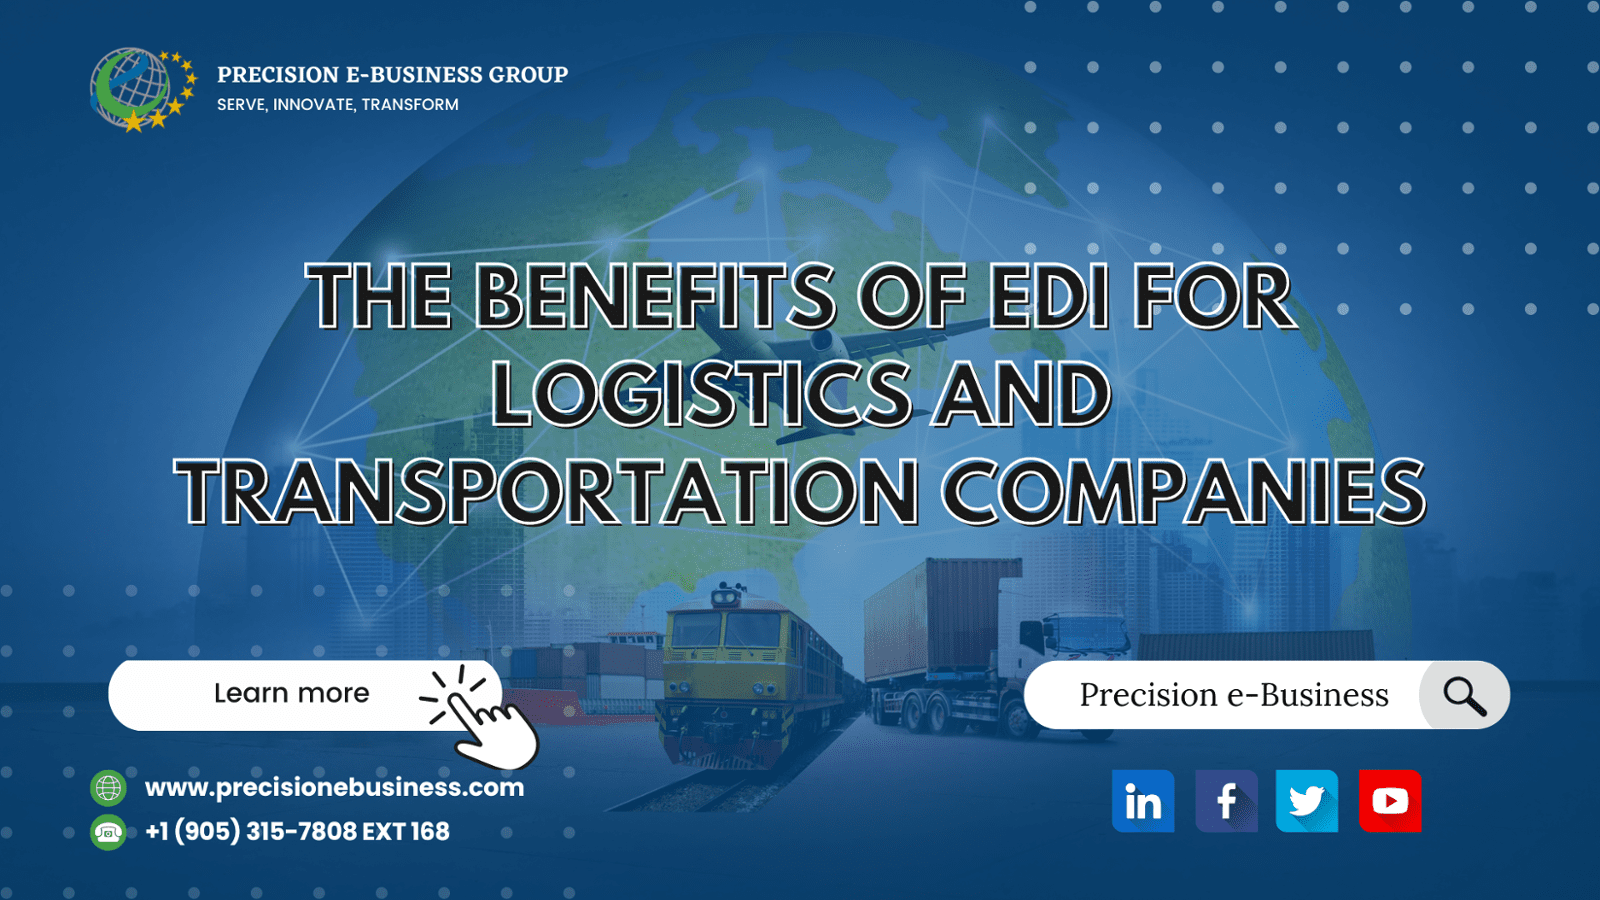 The Benefits of EDI for Logistics and Transportation Companies